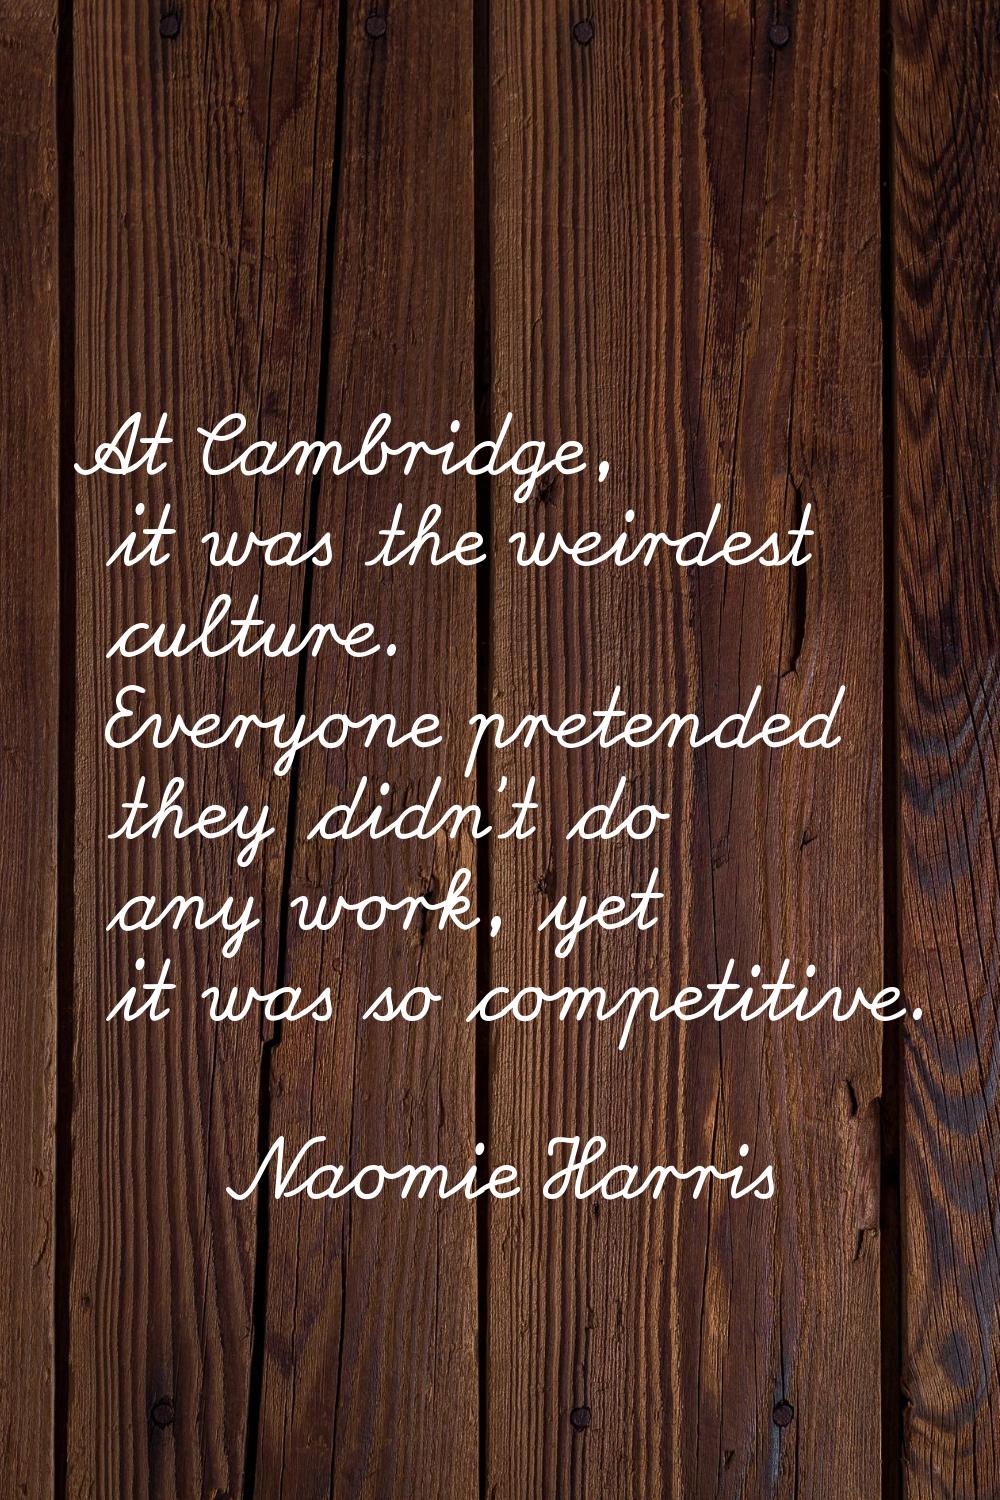 At Cambridge, it was the weirdest culture. Everyone pretended they didn't do any work, yet it was s